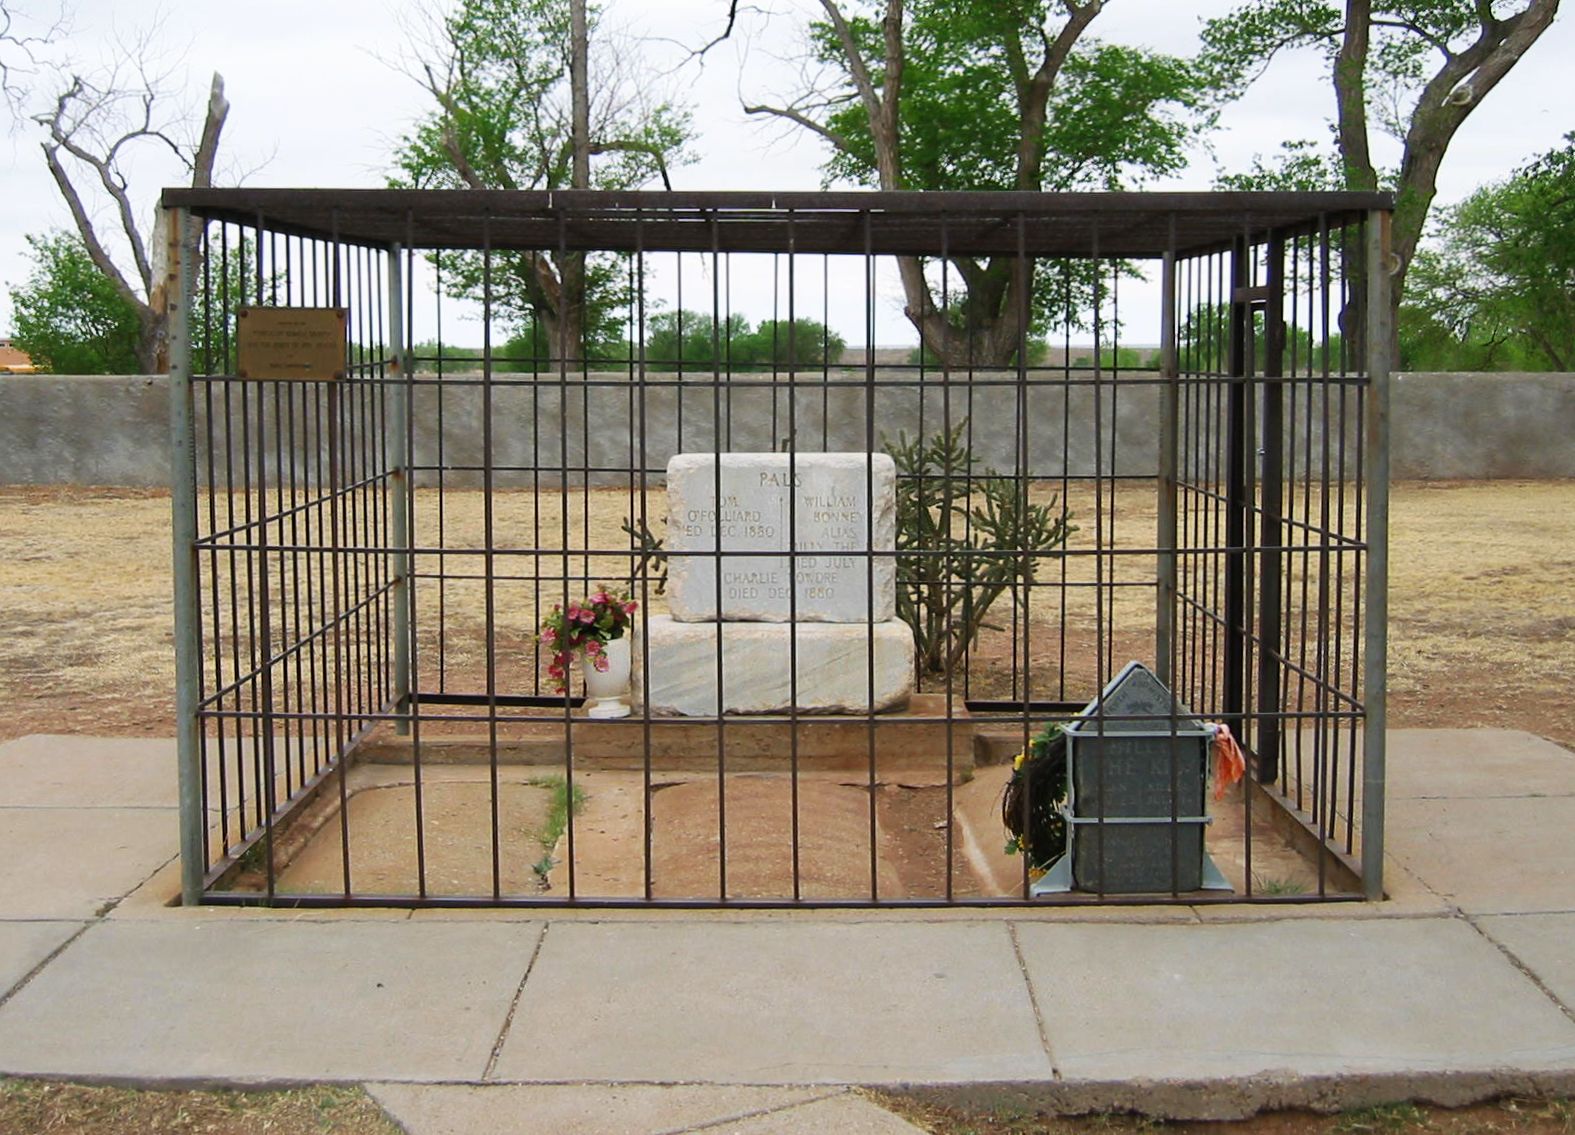 Finally caged in death: Billy the Kid is reportedly buried under a tombstone at the Old Fort Sumner Cemetery is enclosed behind iron bars to prevent it being stolen for a third time.  Photo by Sam Vast.